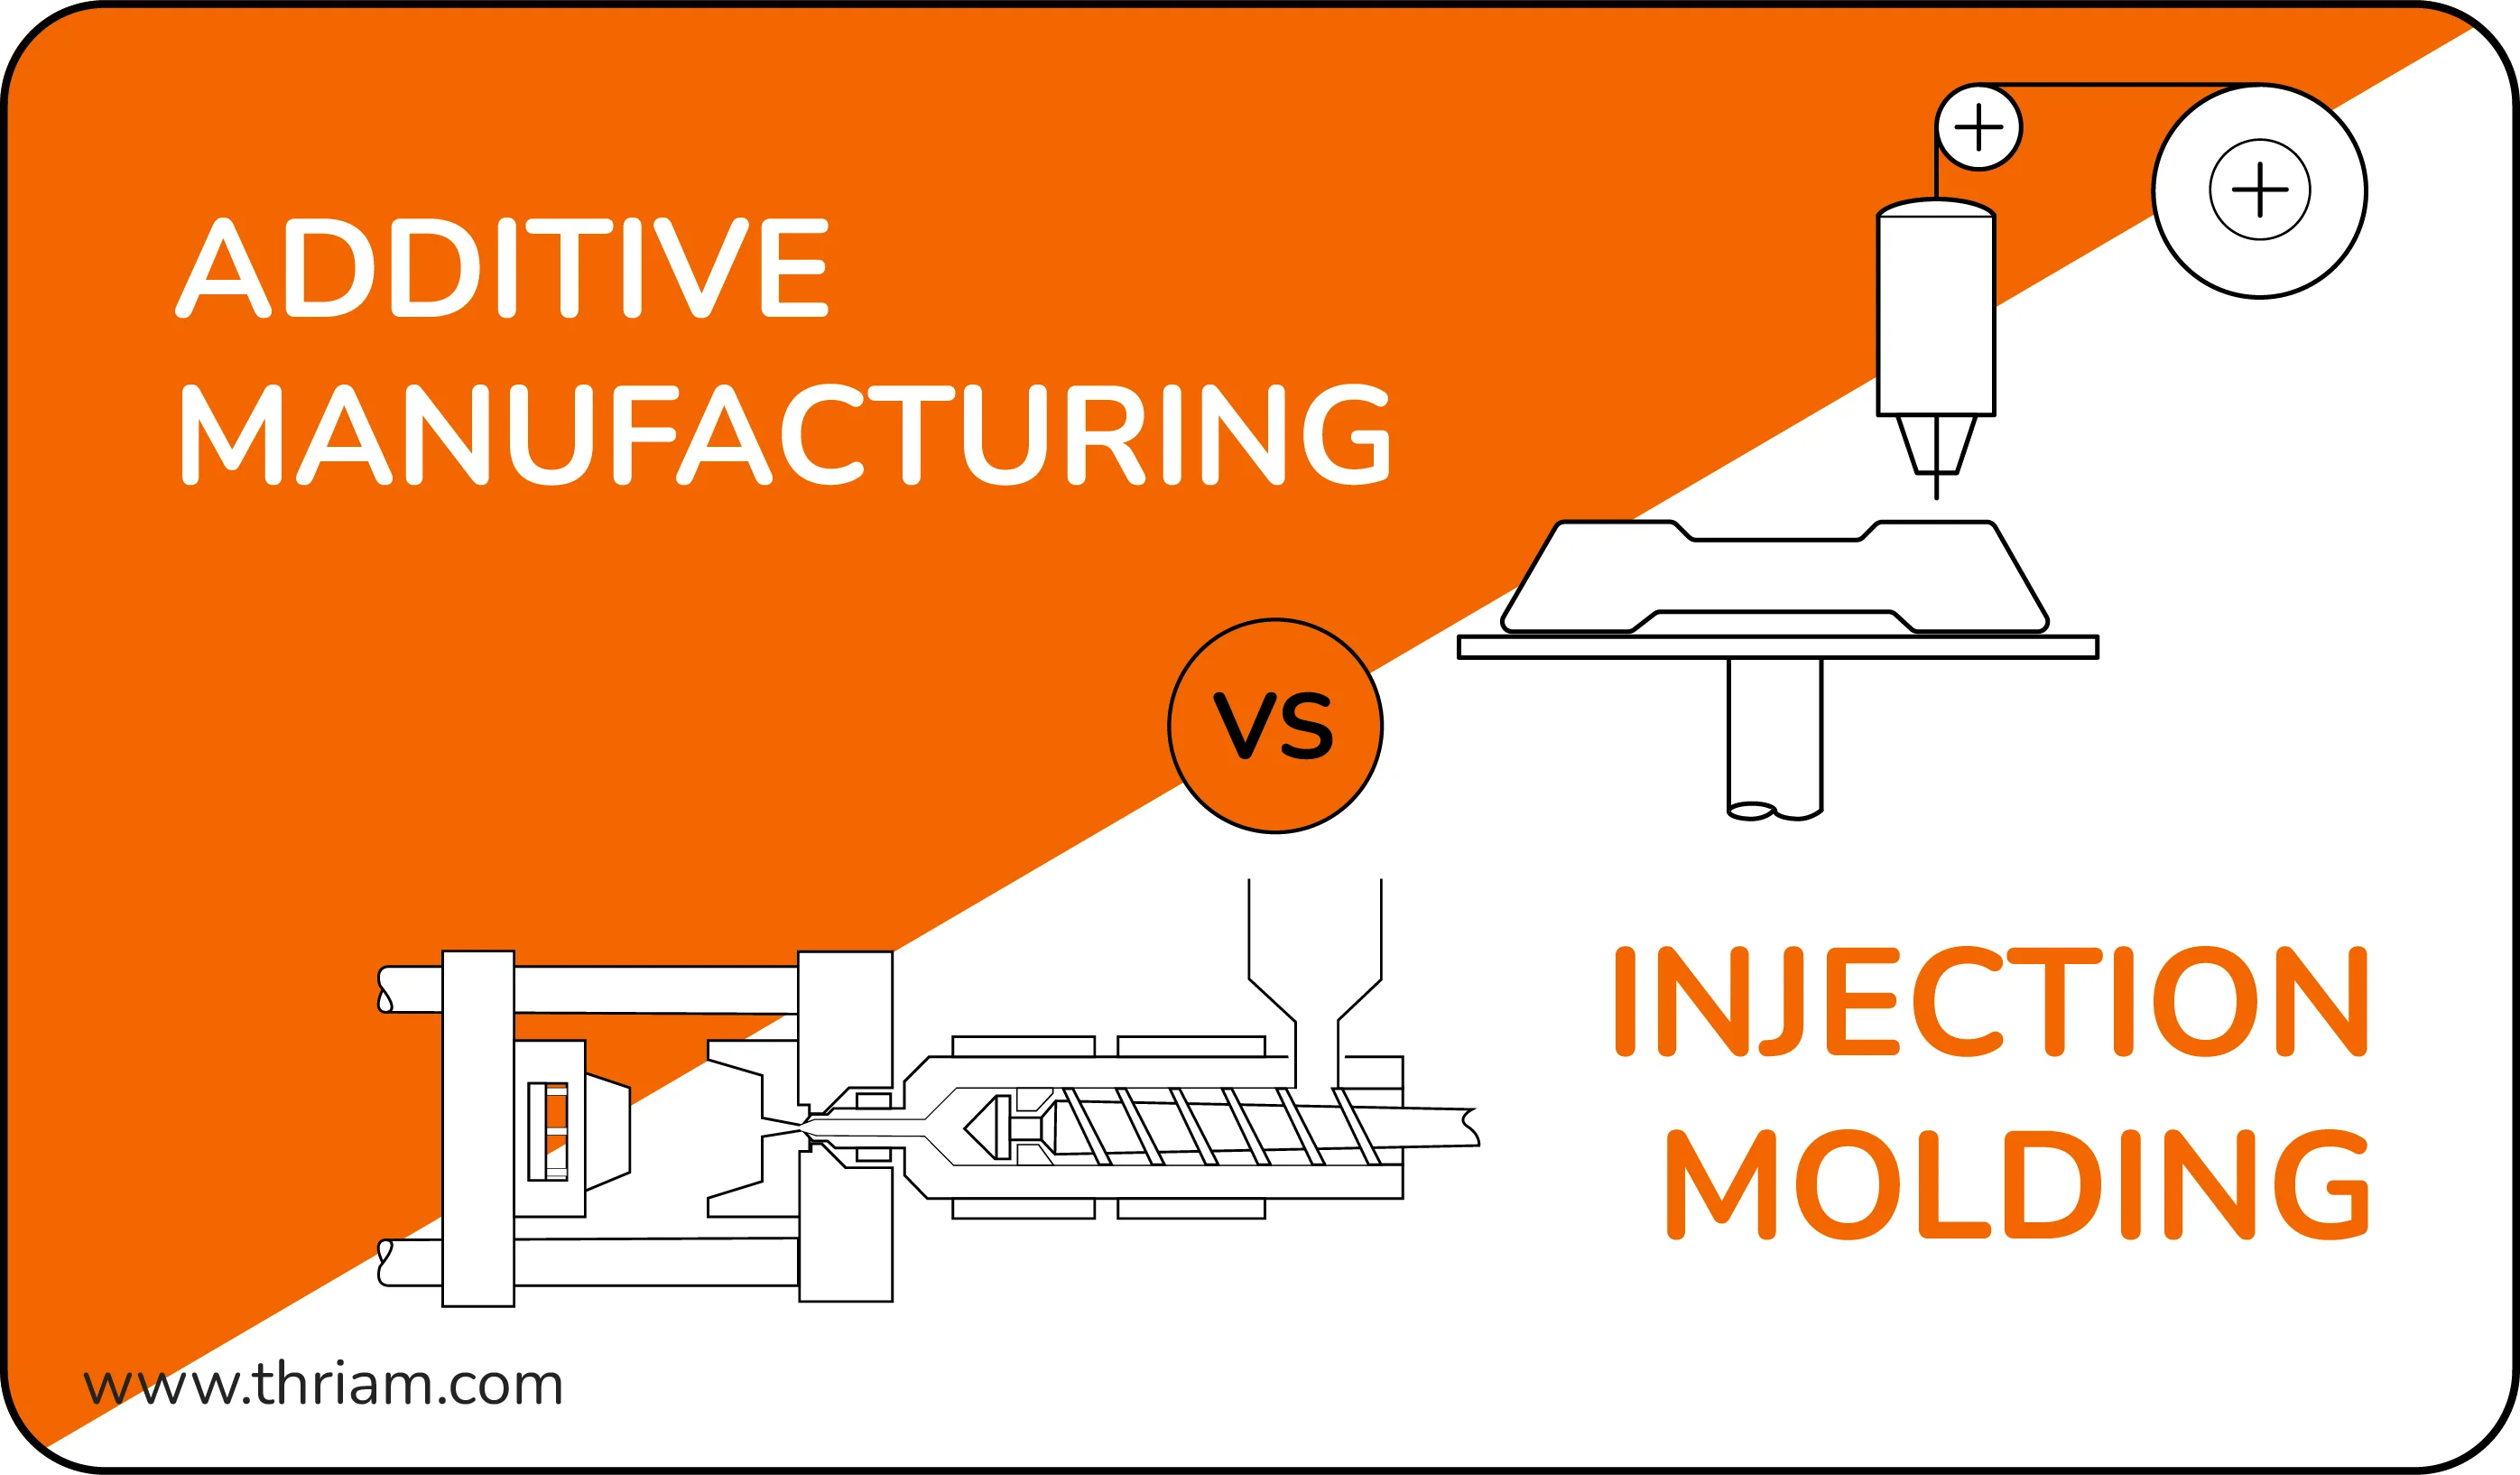 The difference between injection moulding and additive manufacturing Banner by Thriam. Add topics (Advantages, Disadvantages, Types, Applications, and Case Study)